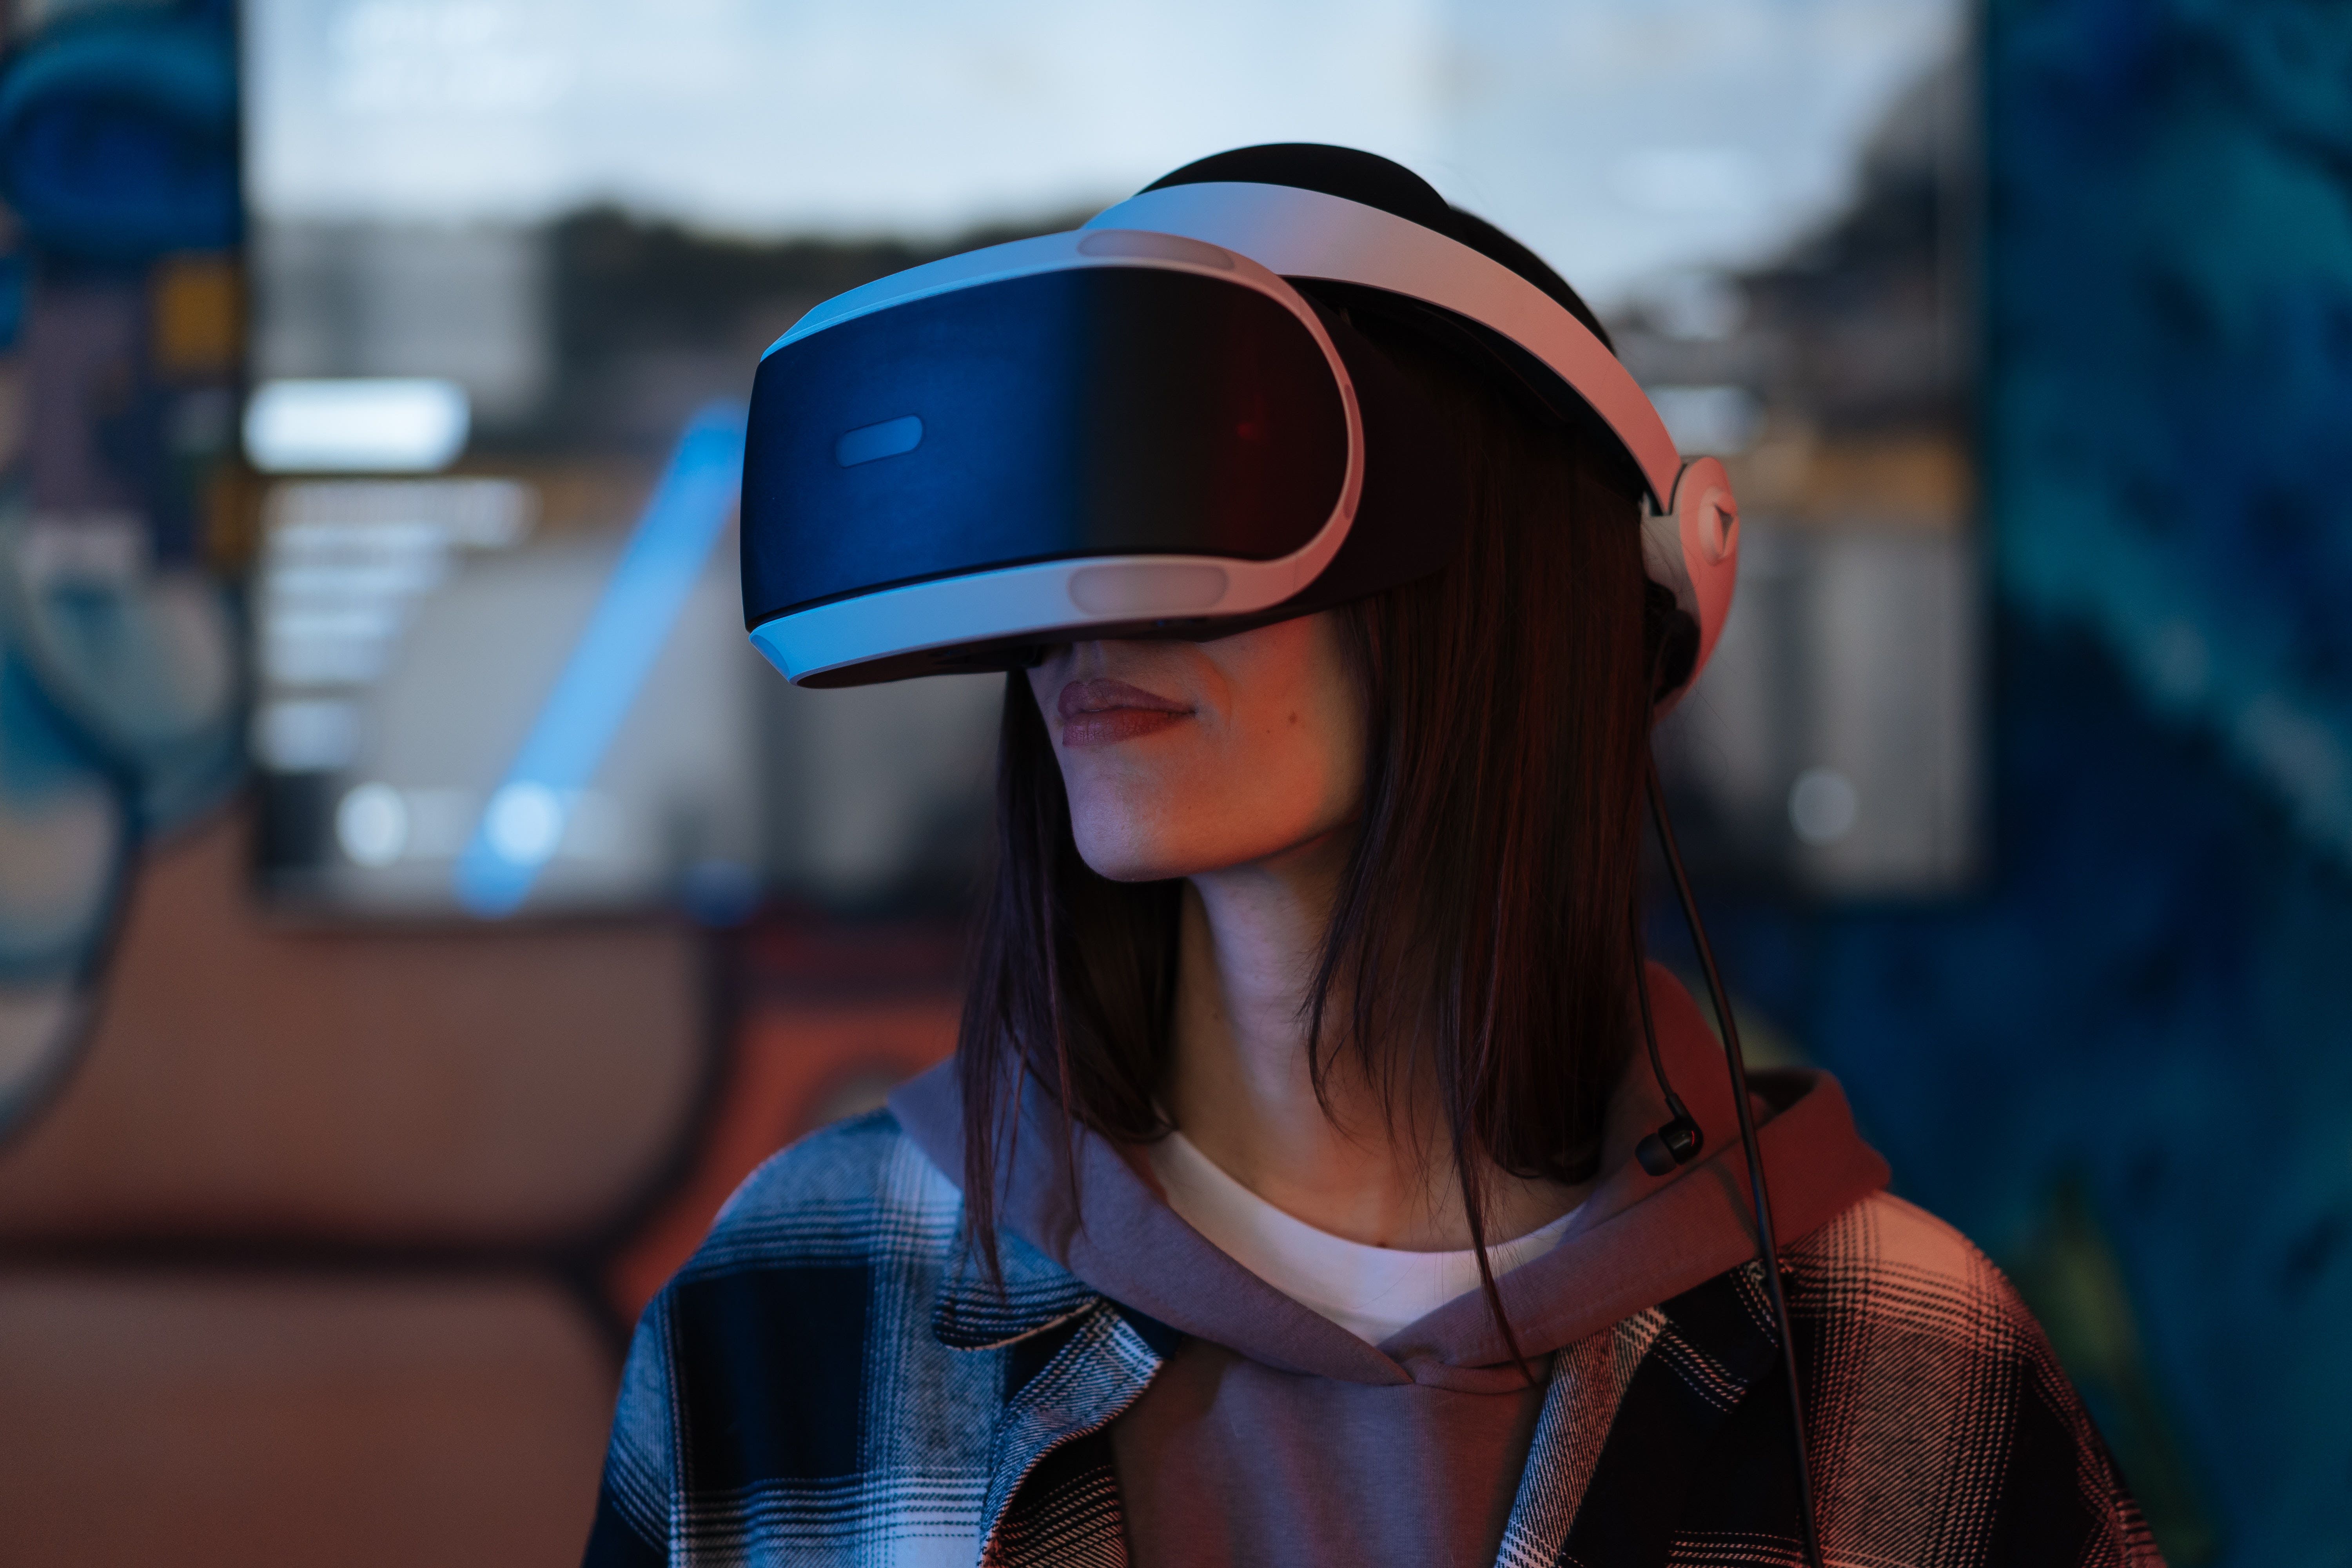 10 Augmented And Virtual Reality Stocks To Watch On The Heels Of Facebook's Meta Rebrand